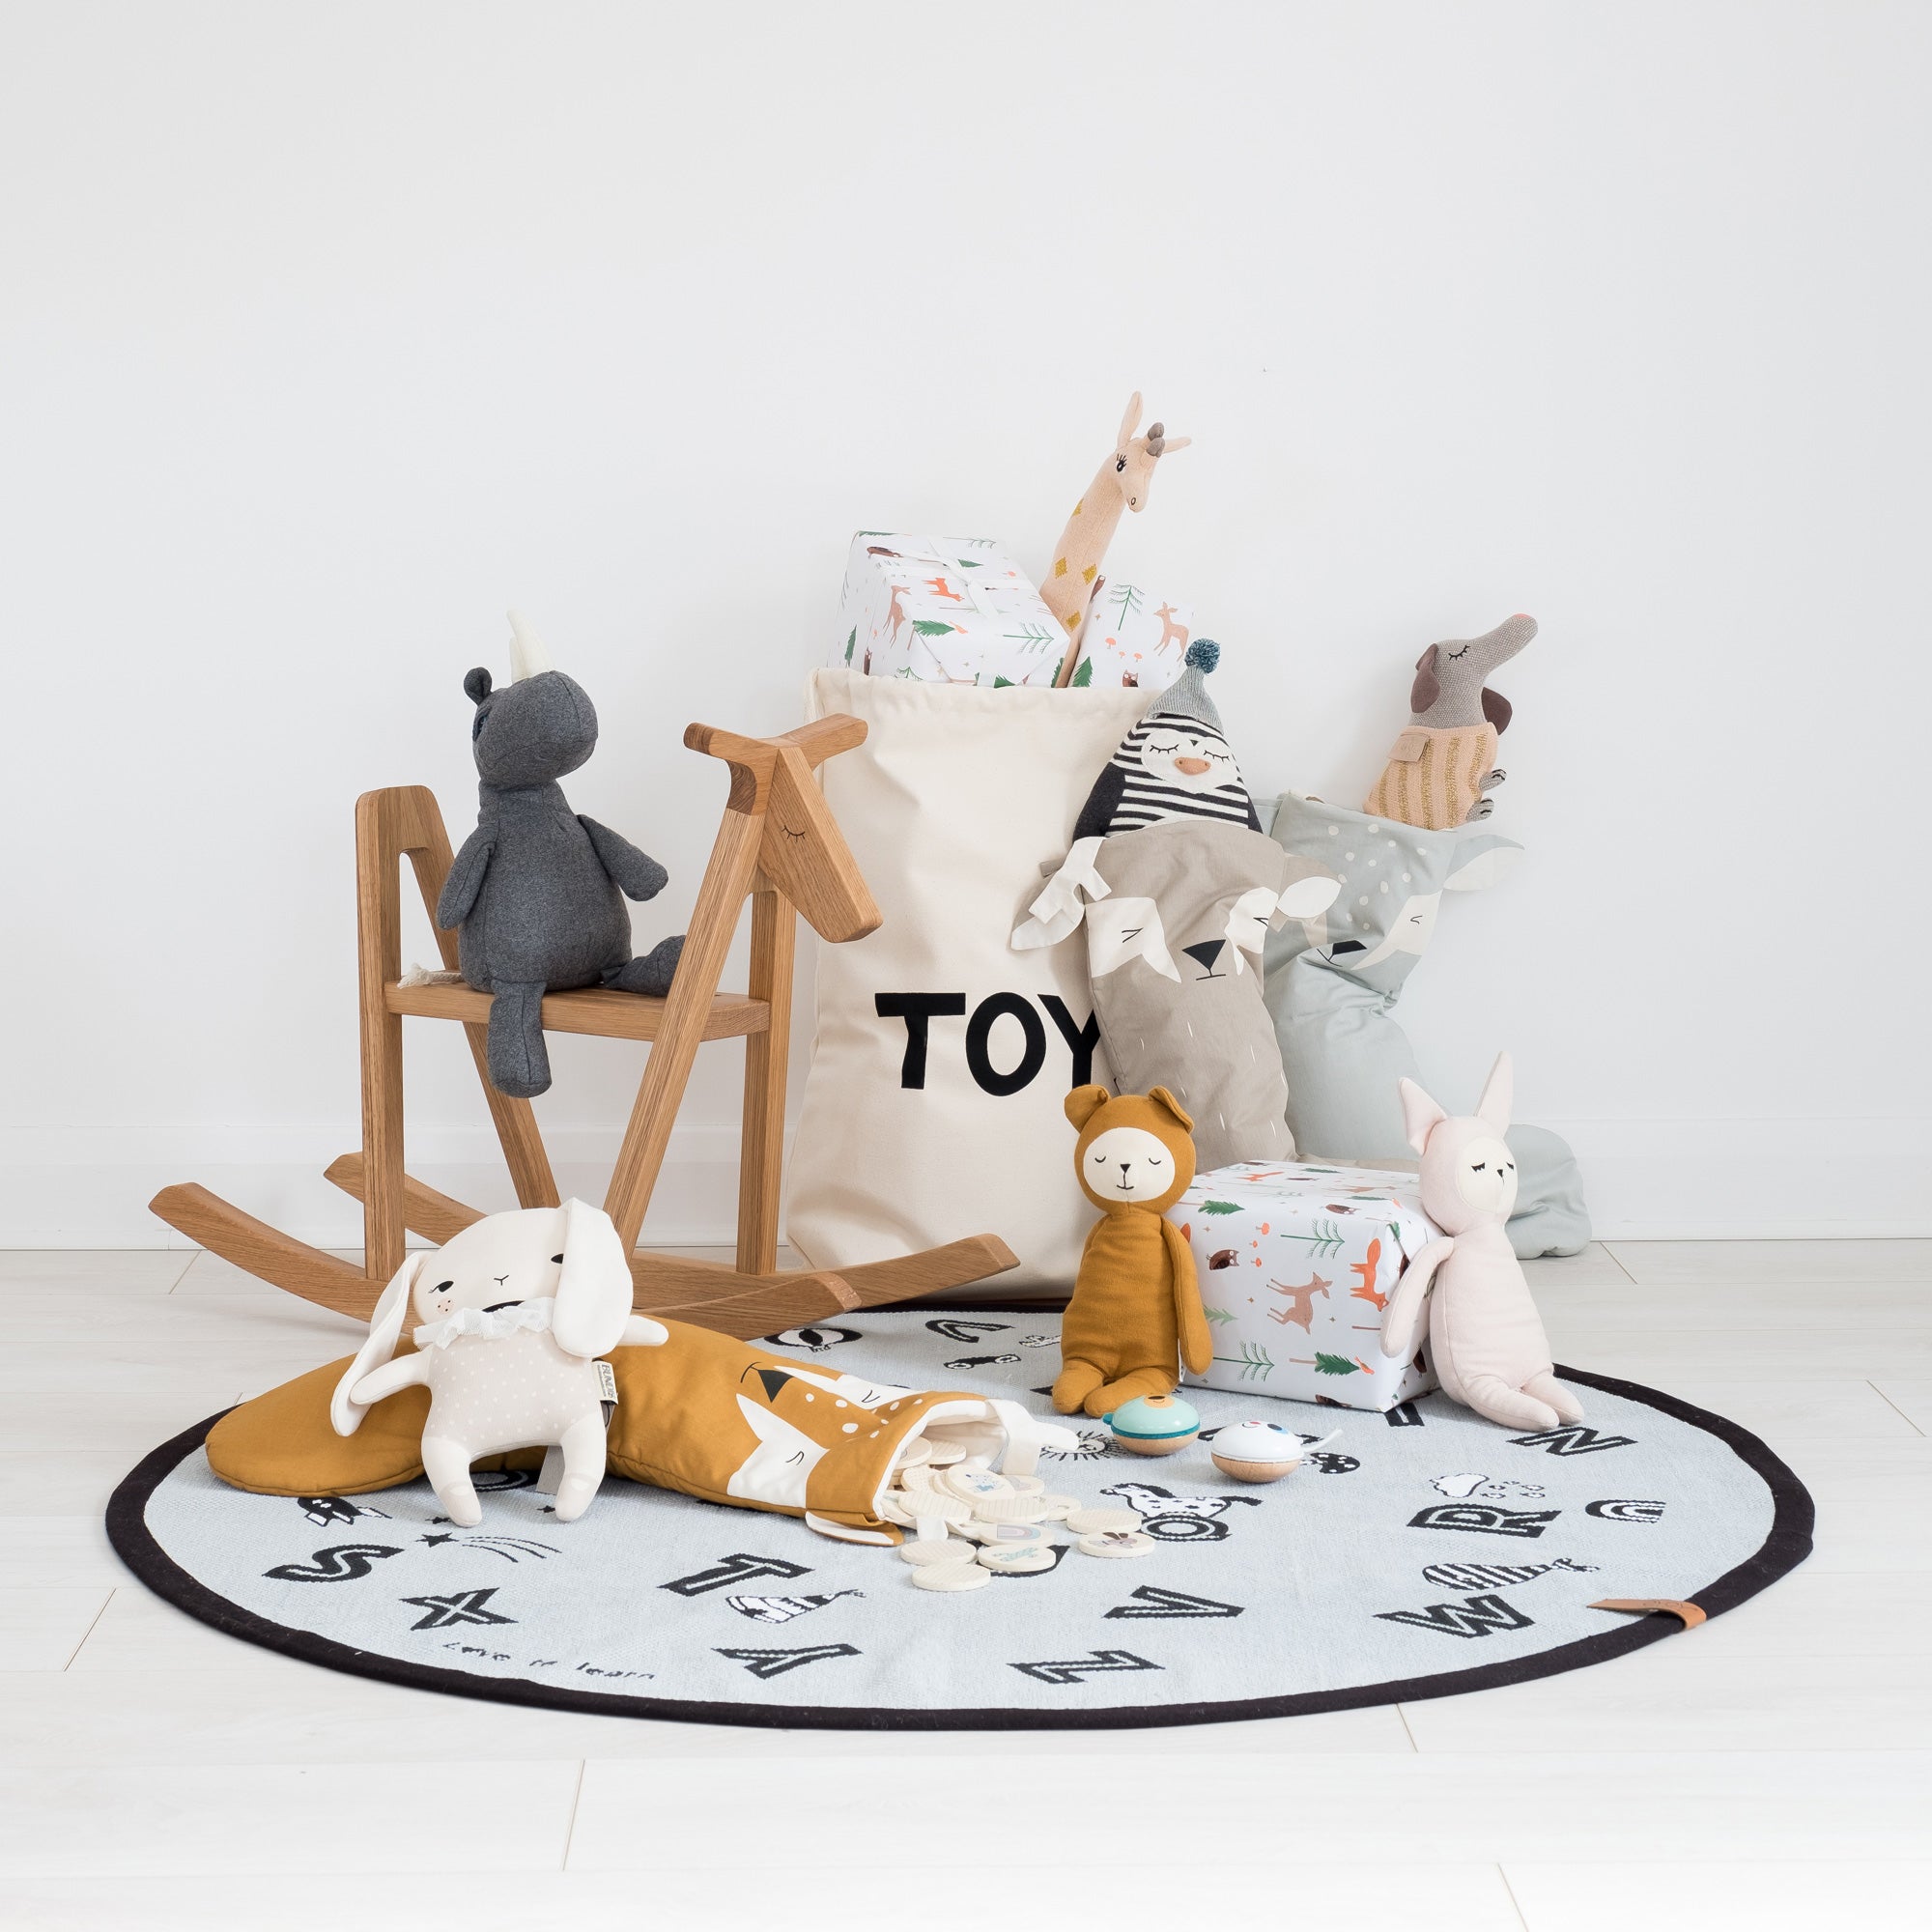 Children's toys and accessories, available at Bobby Rabbit.